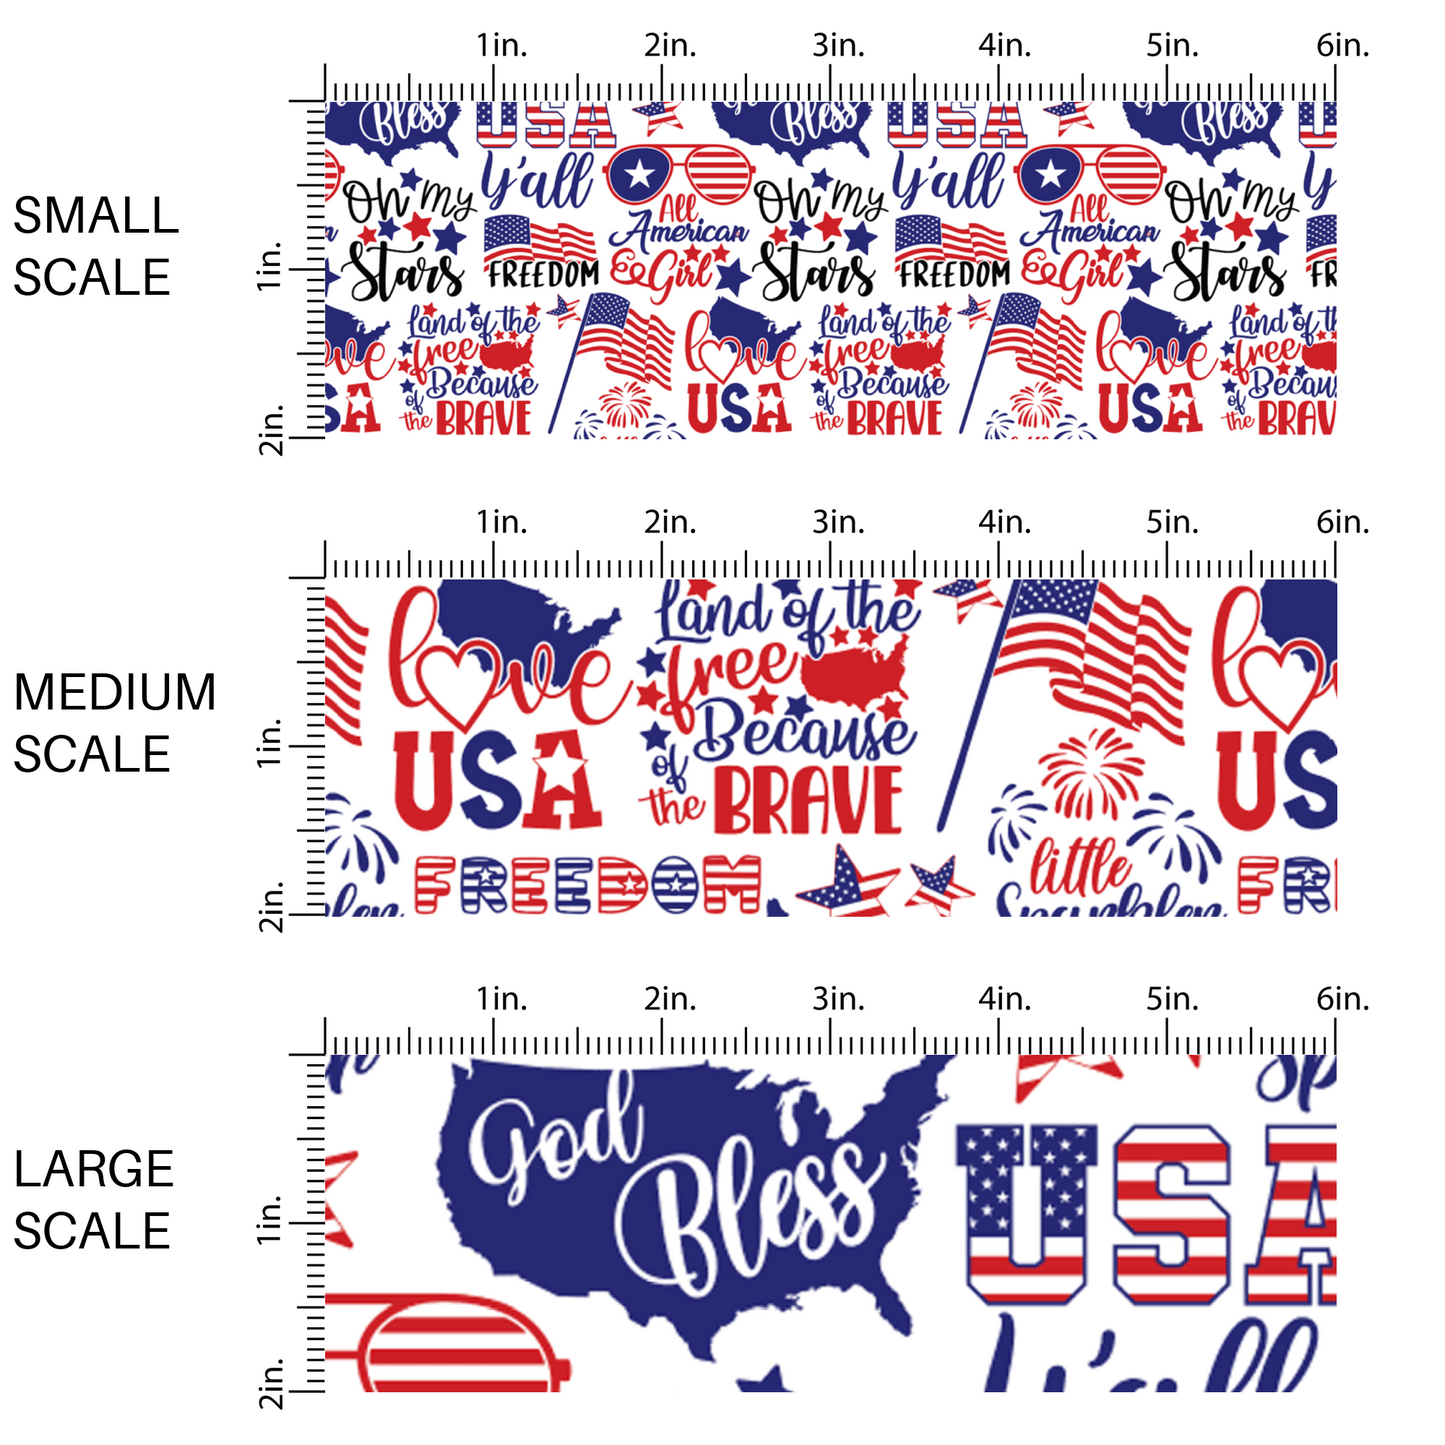 White fabric by the yard scaled image guide with traditional patriotic sayings.